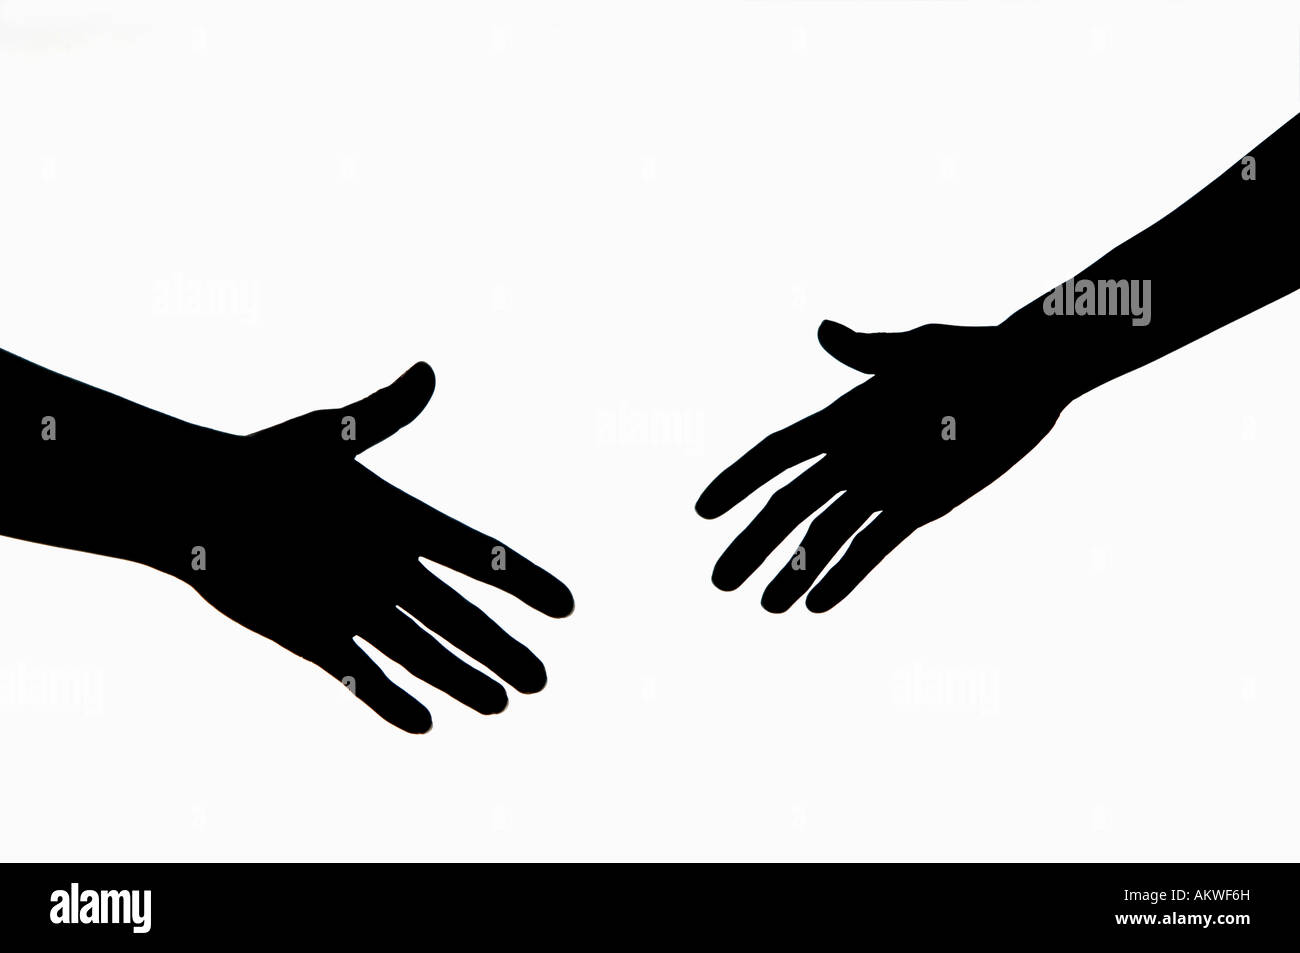 Human hands, silhouette Stock Photo